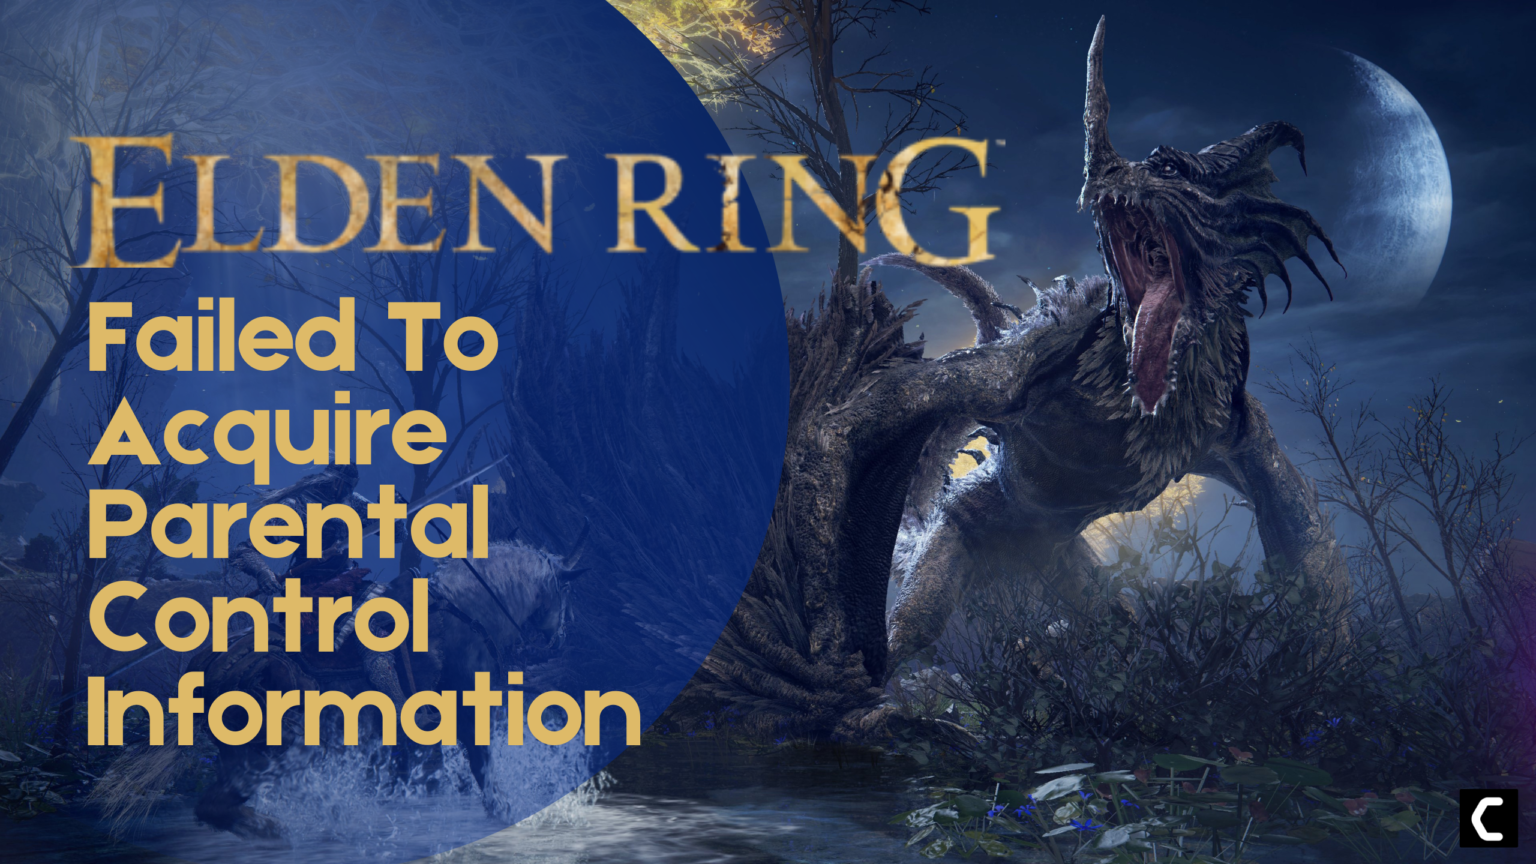 Elden Ring Failed To Acquire Parental Control Information?